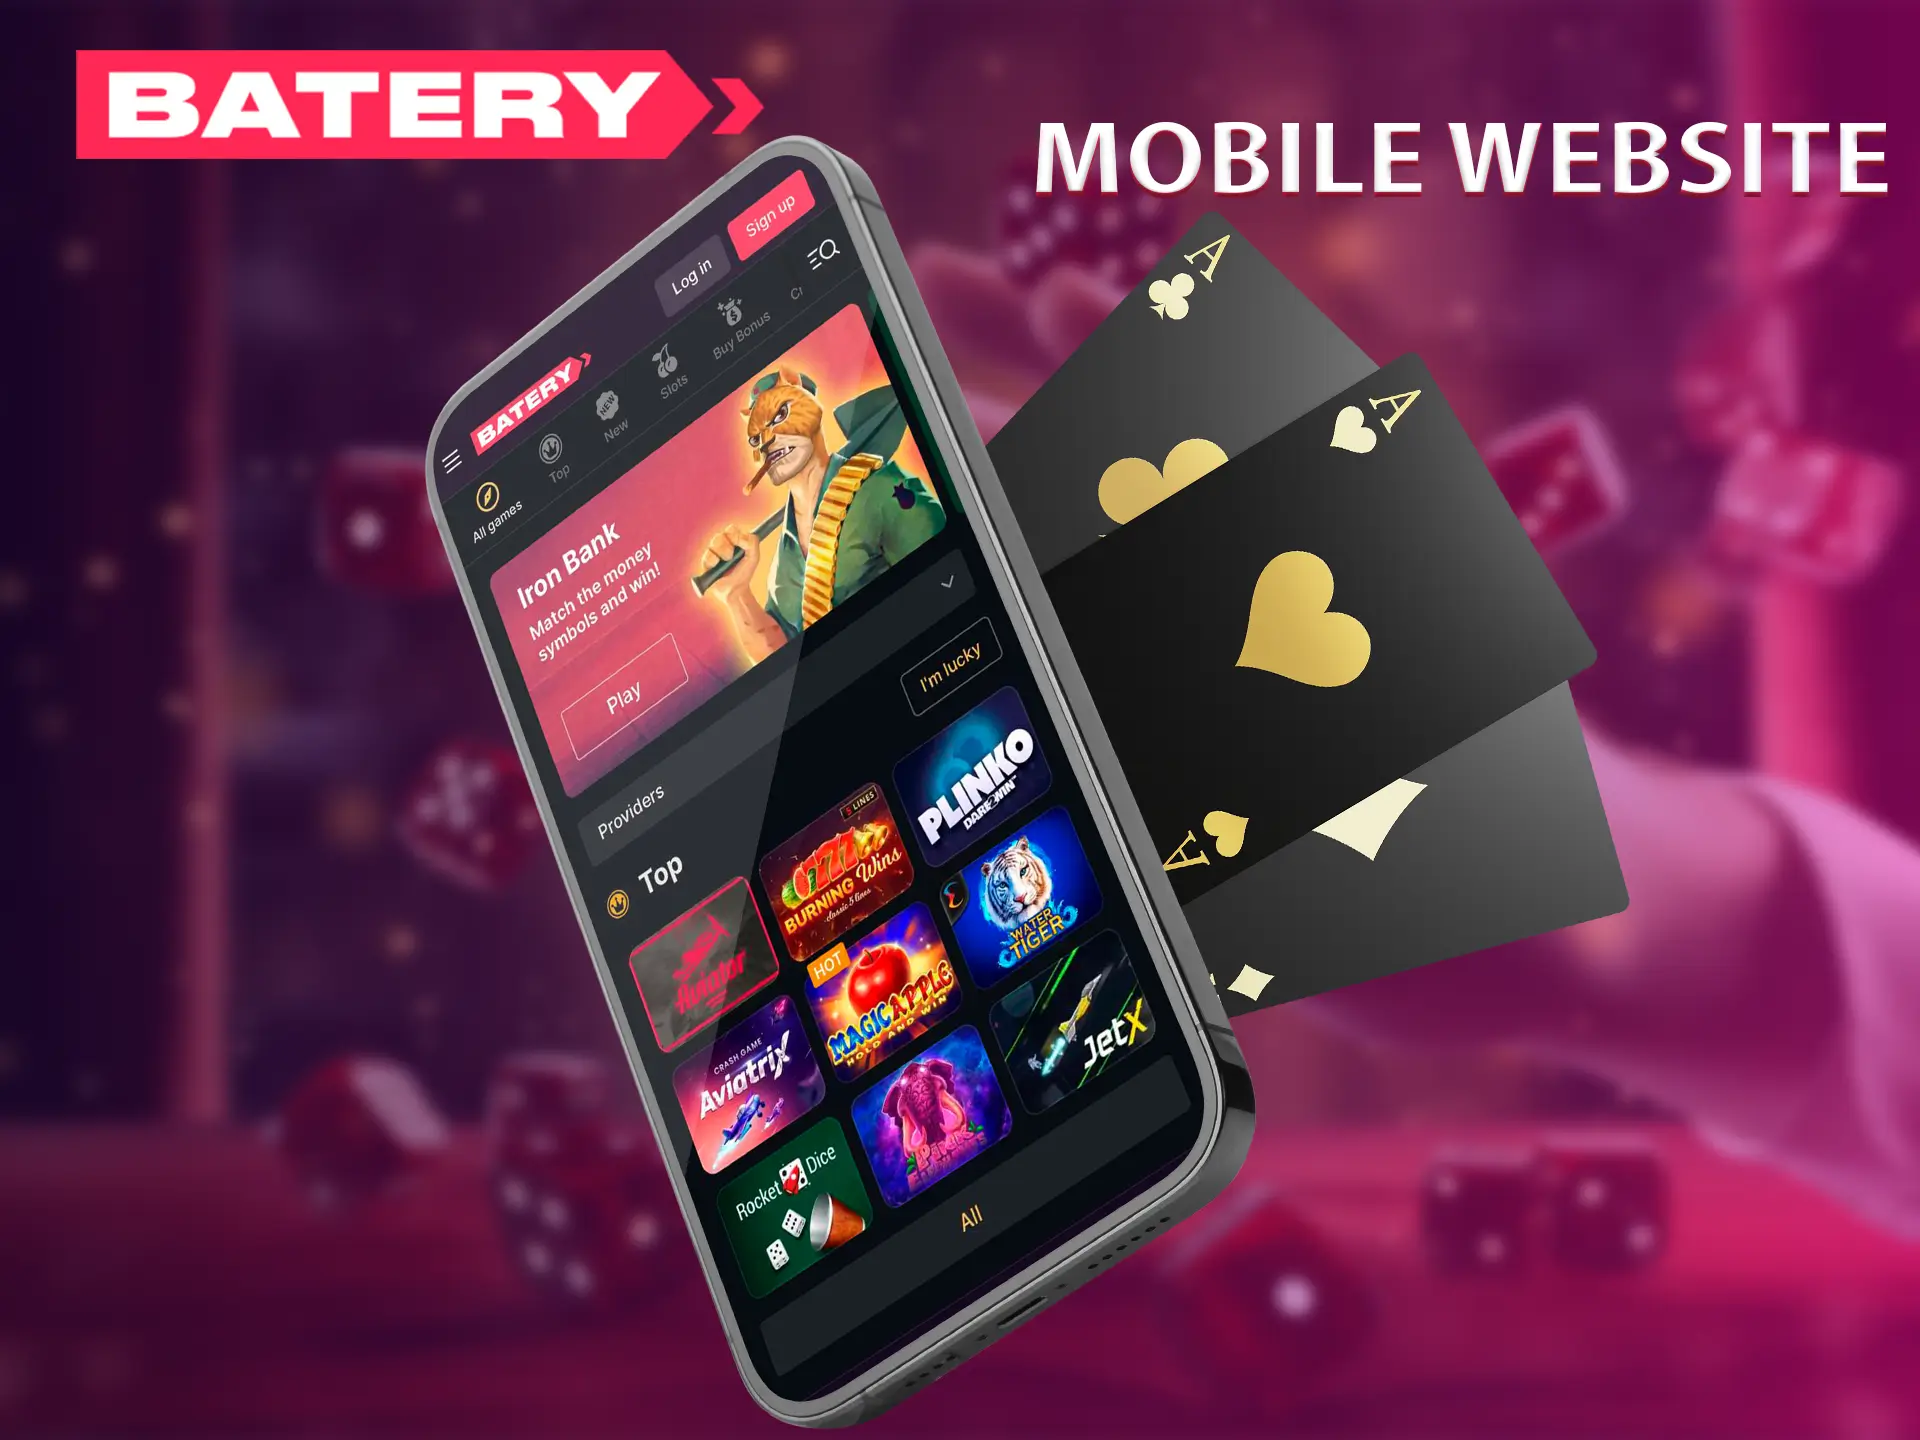 Batery's mobile site adapts perfectly to any mobile device.